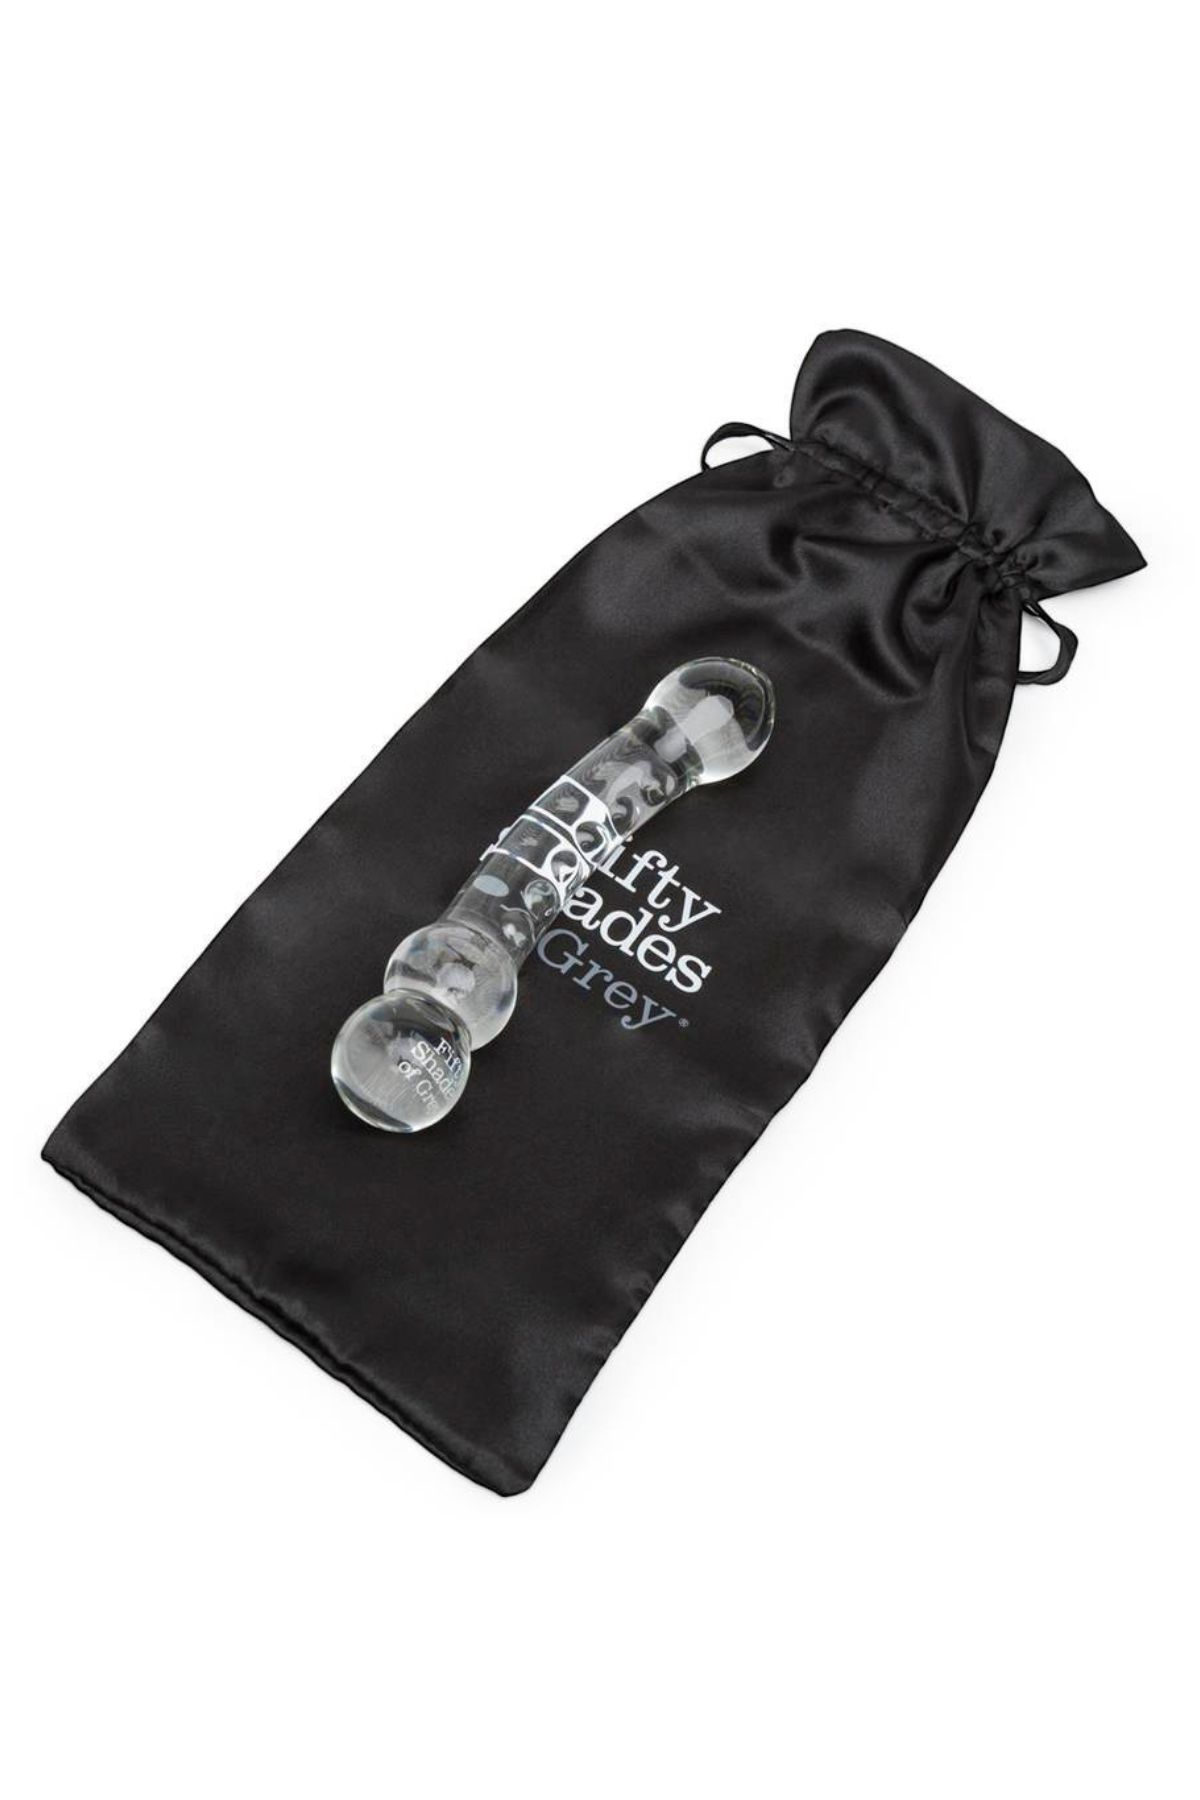 Drive Me Crazy Glass Dildo From Fifty Shades of Grey Online | Matilda's